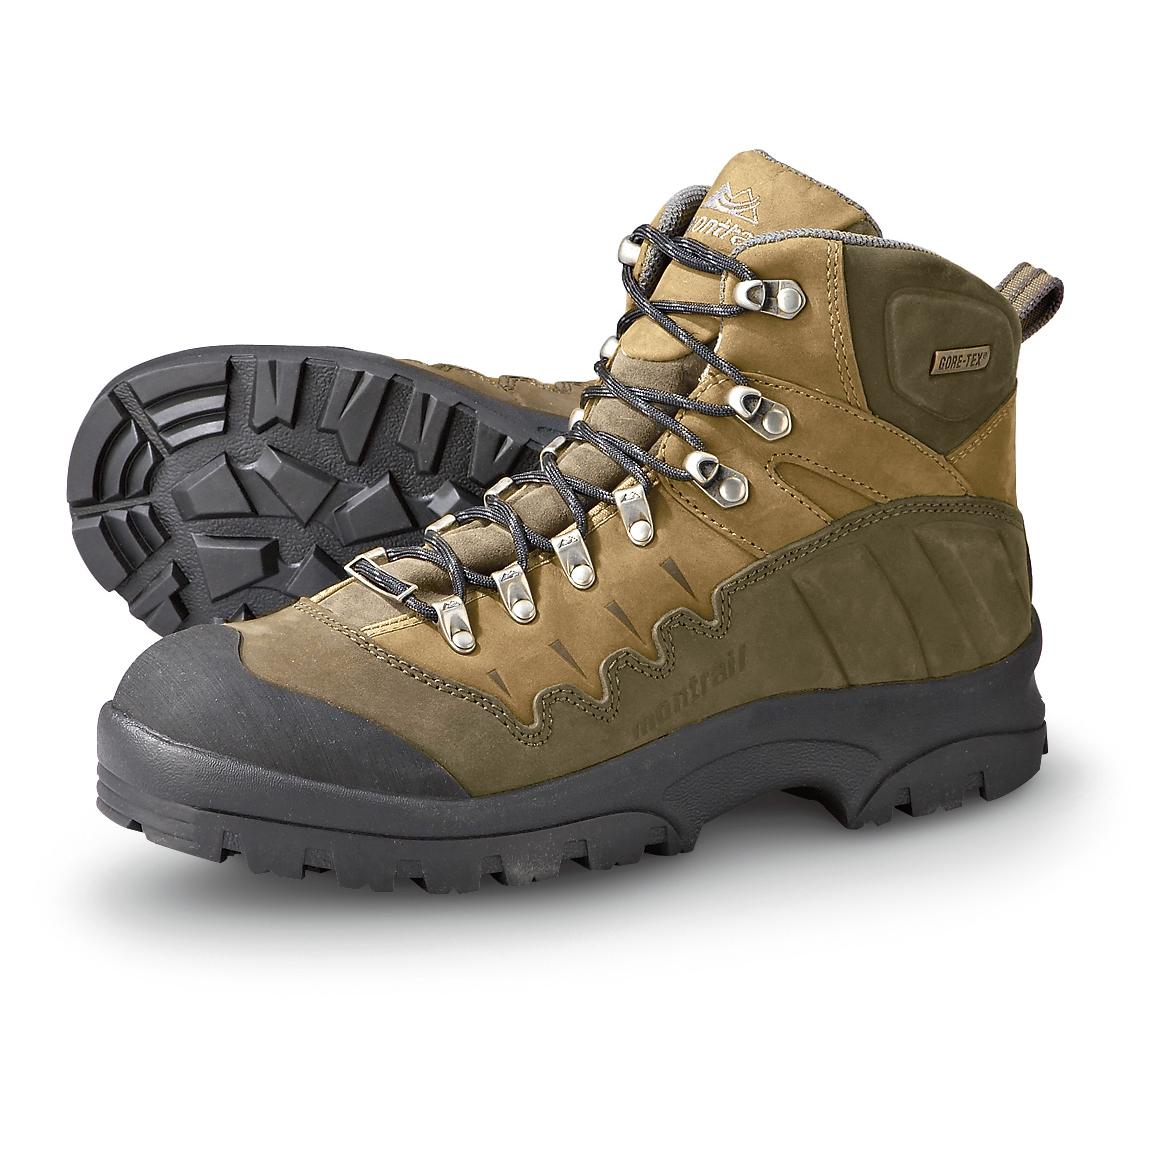 montrail hiking shoes